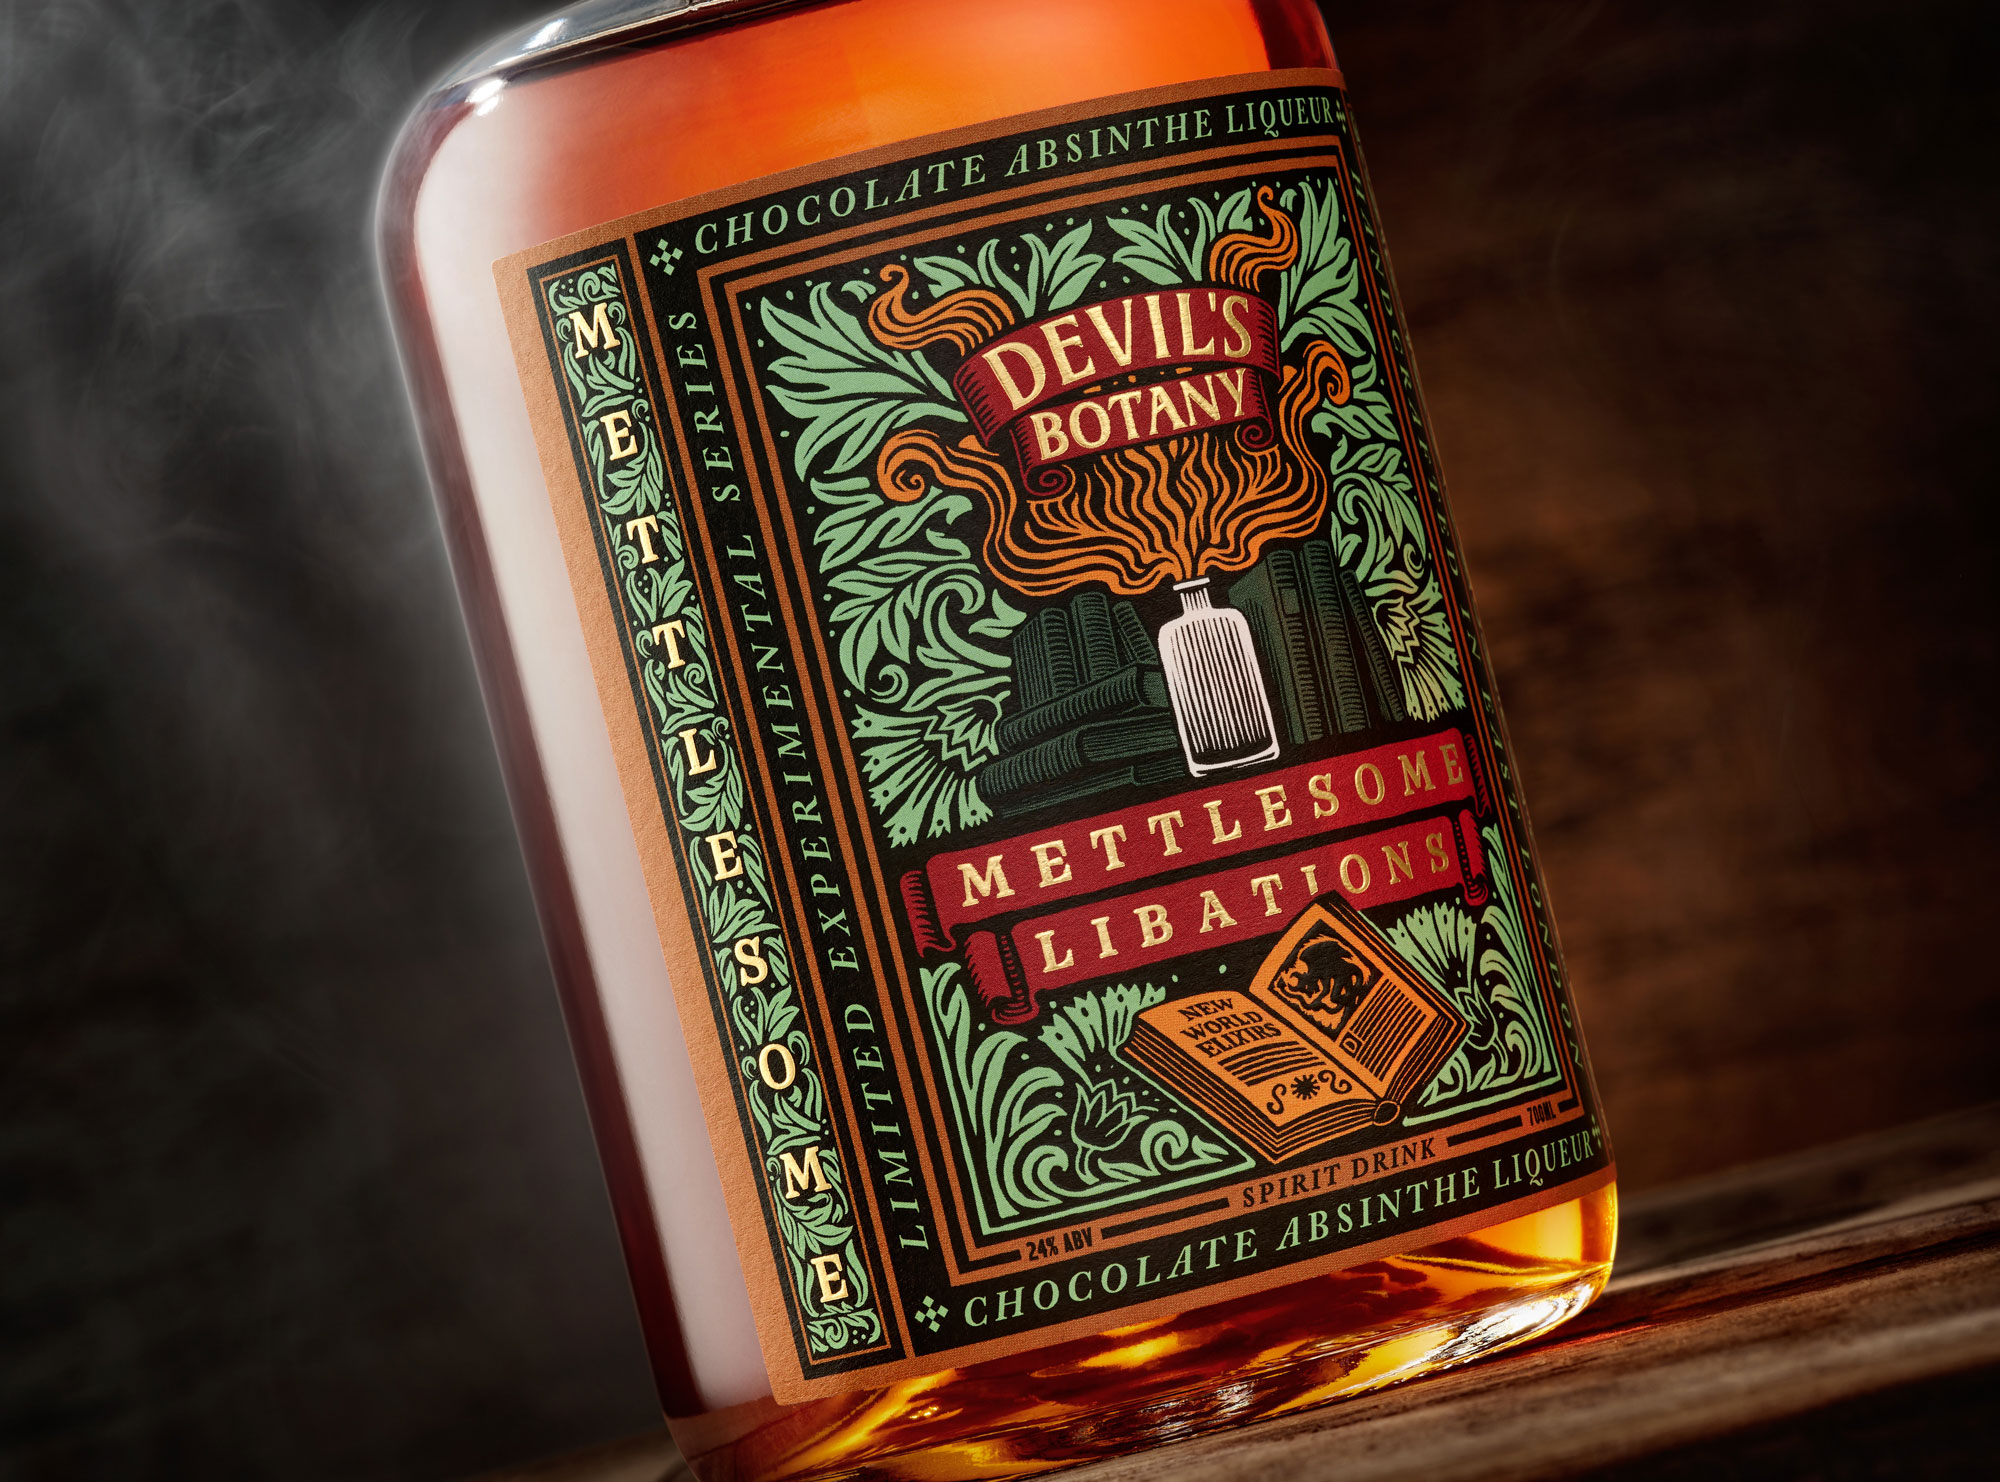 Devil's Botany Distillery's Mettlesome Libations package design by Chad Michael Studio